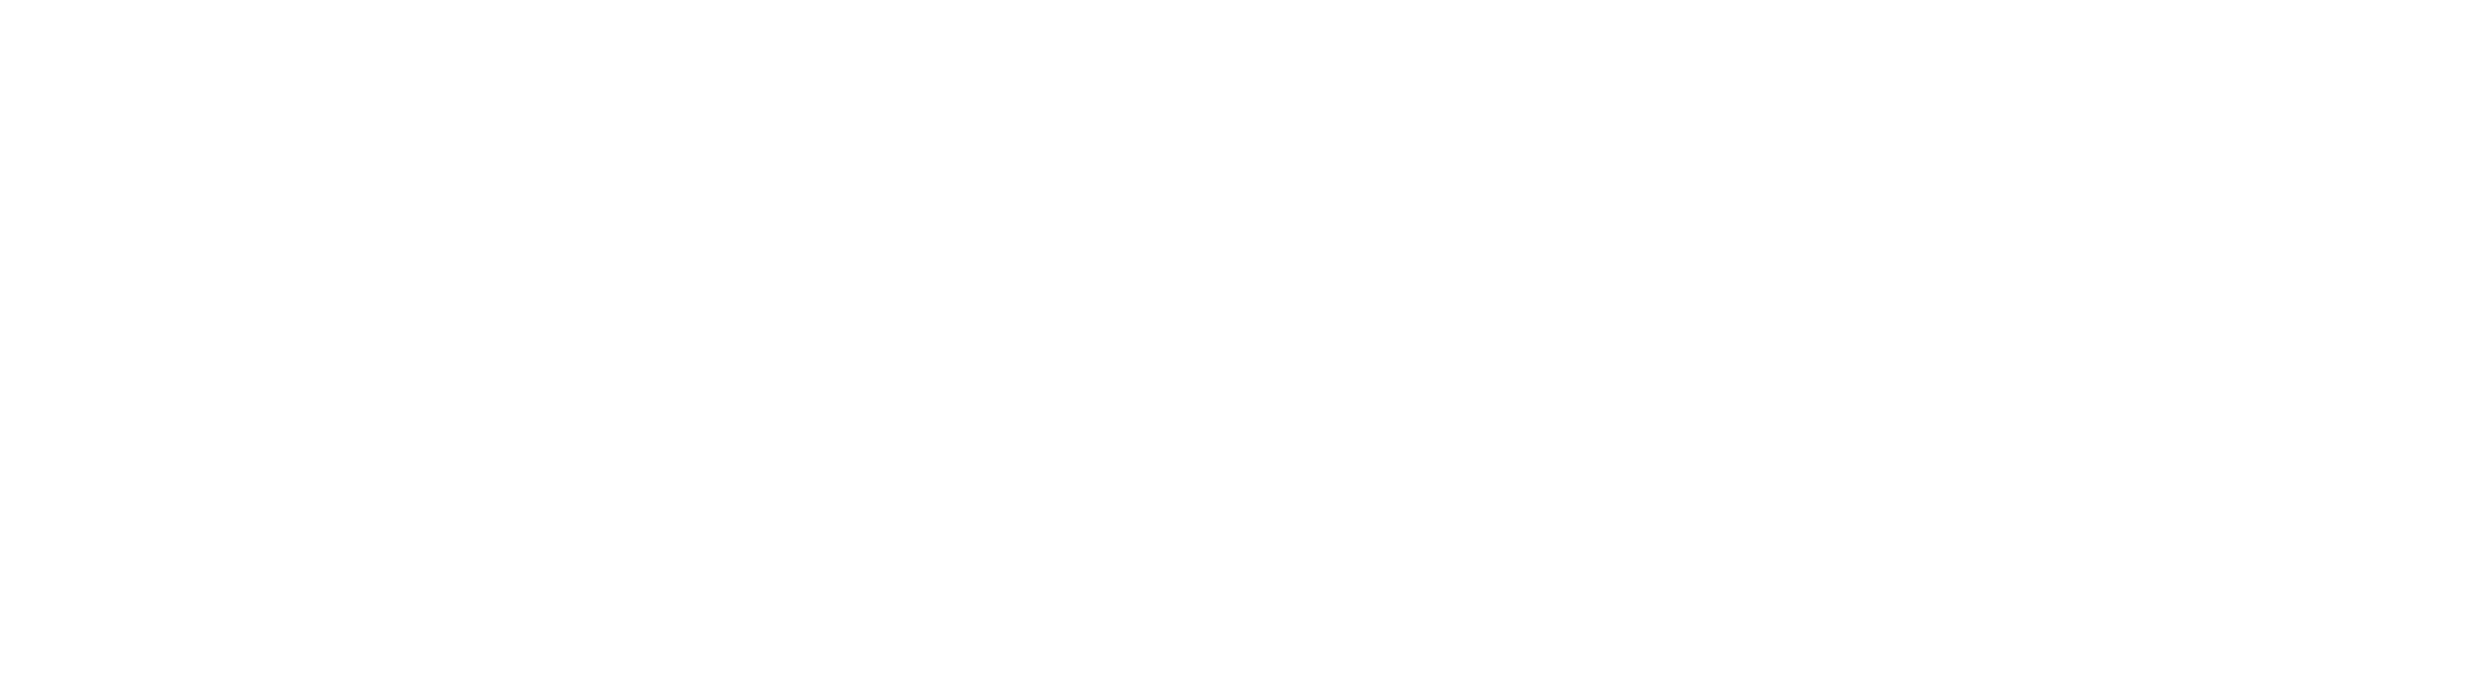 New Year's Eve Gothic Circus